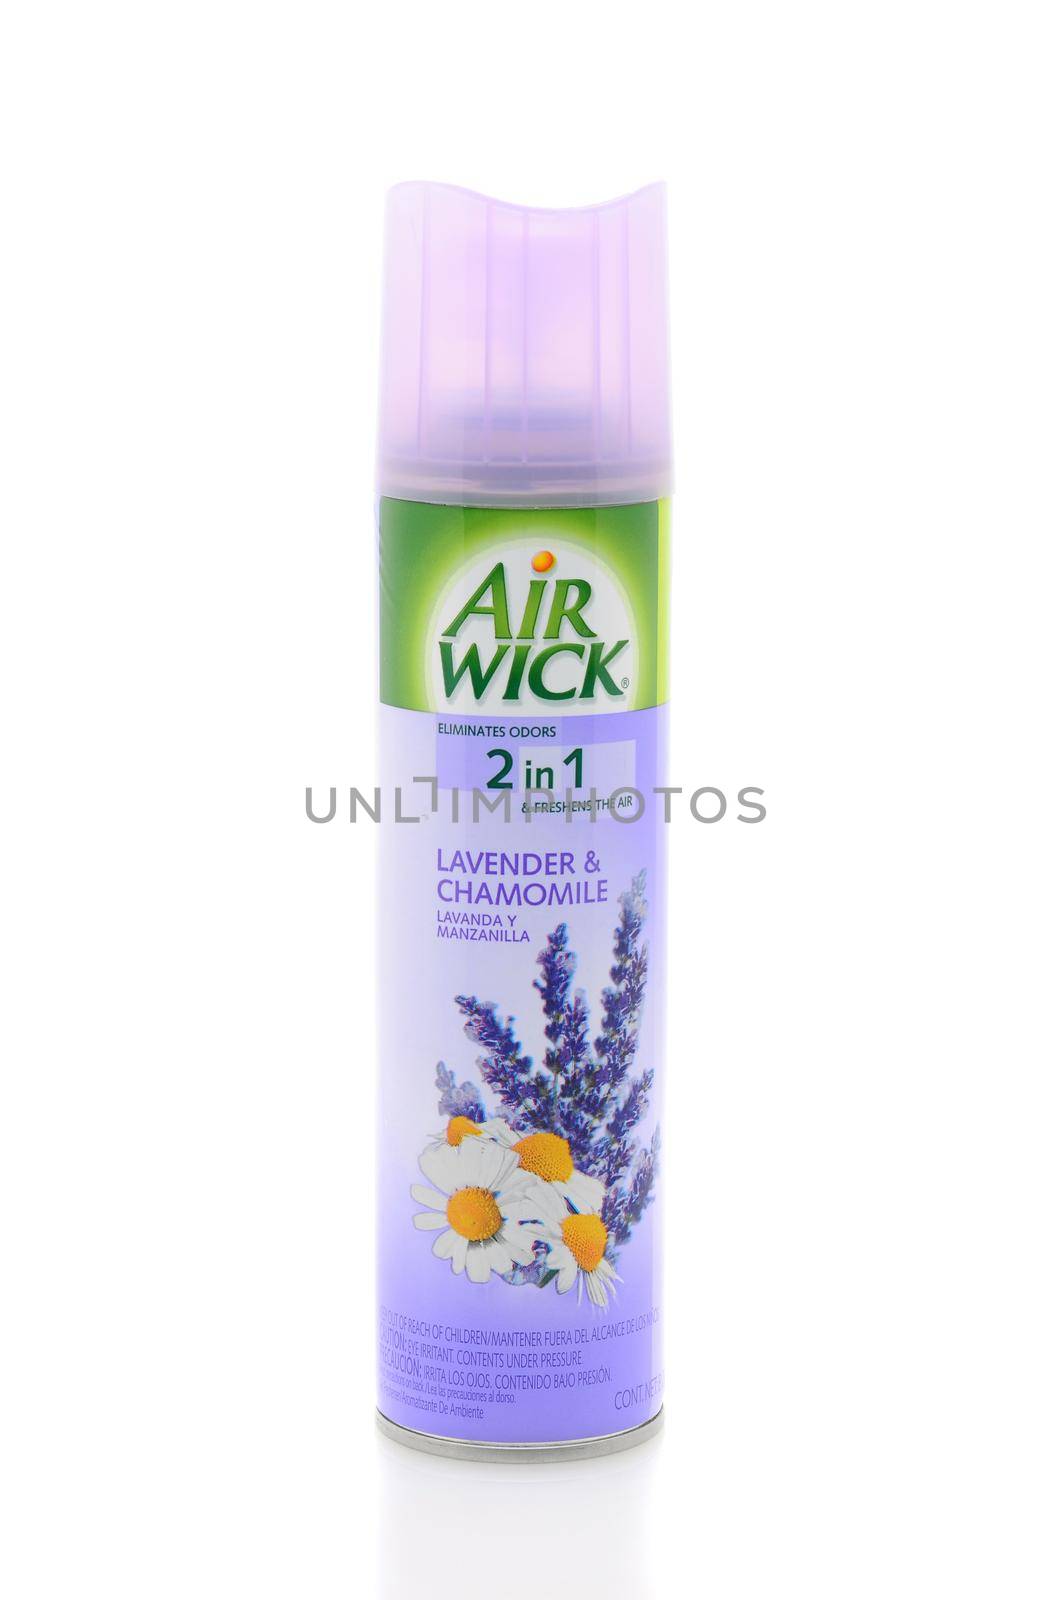 IRVINE, CA - JAN 31, 2011: Single aerosol can of Air Wick Lavender and Chamomile Freshener on a white background